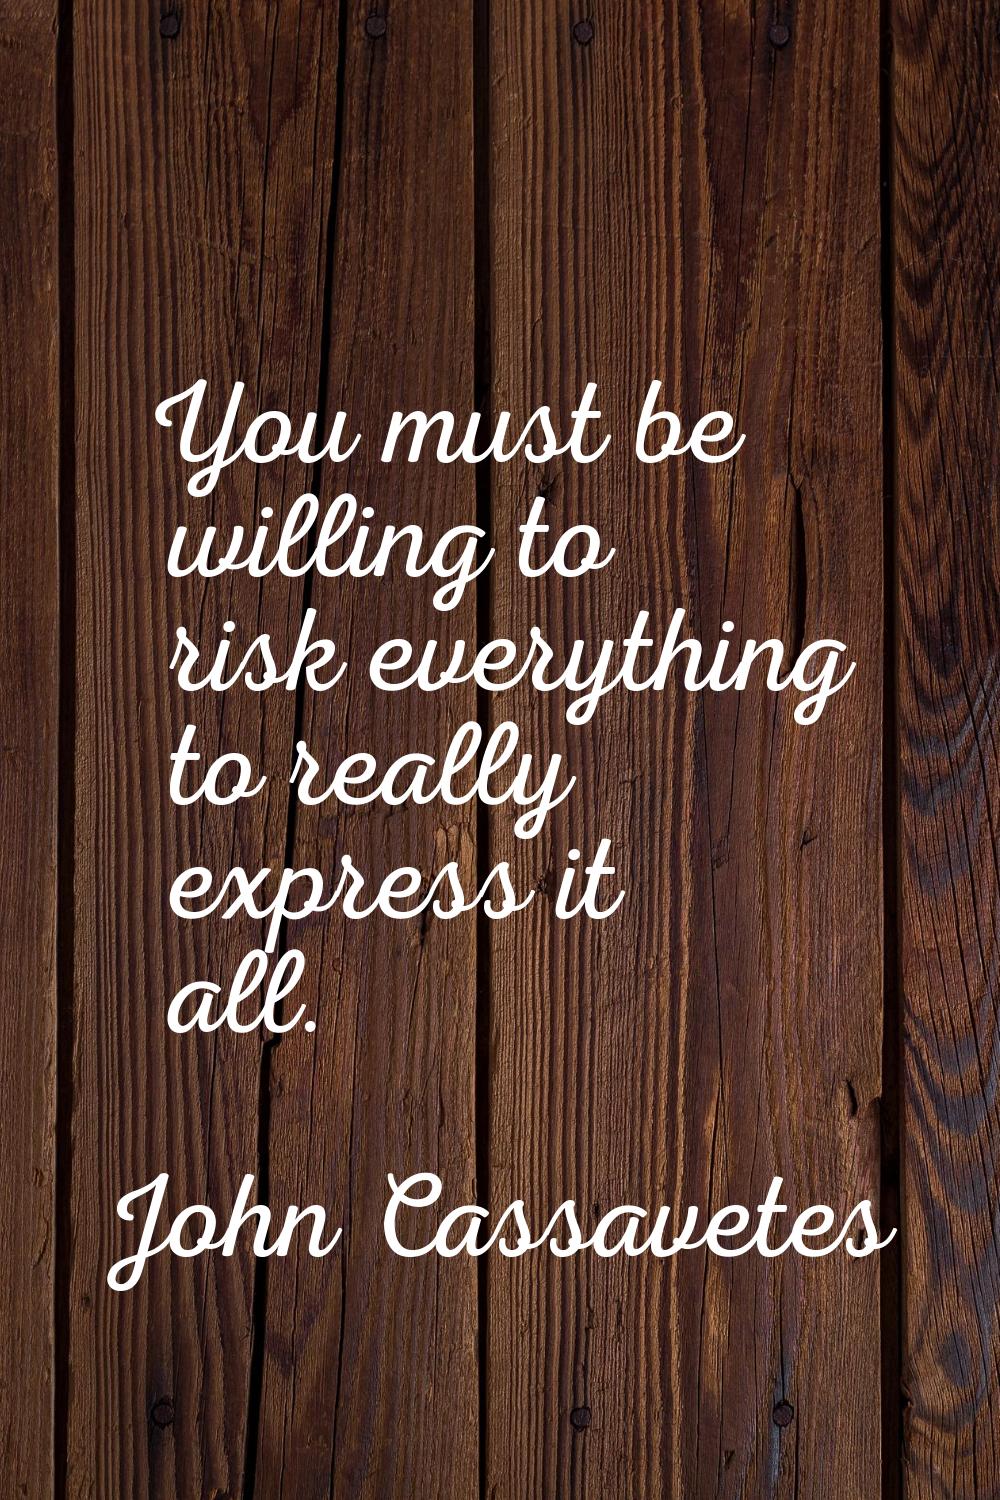 You must be willing to risk everything to really express it all.